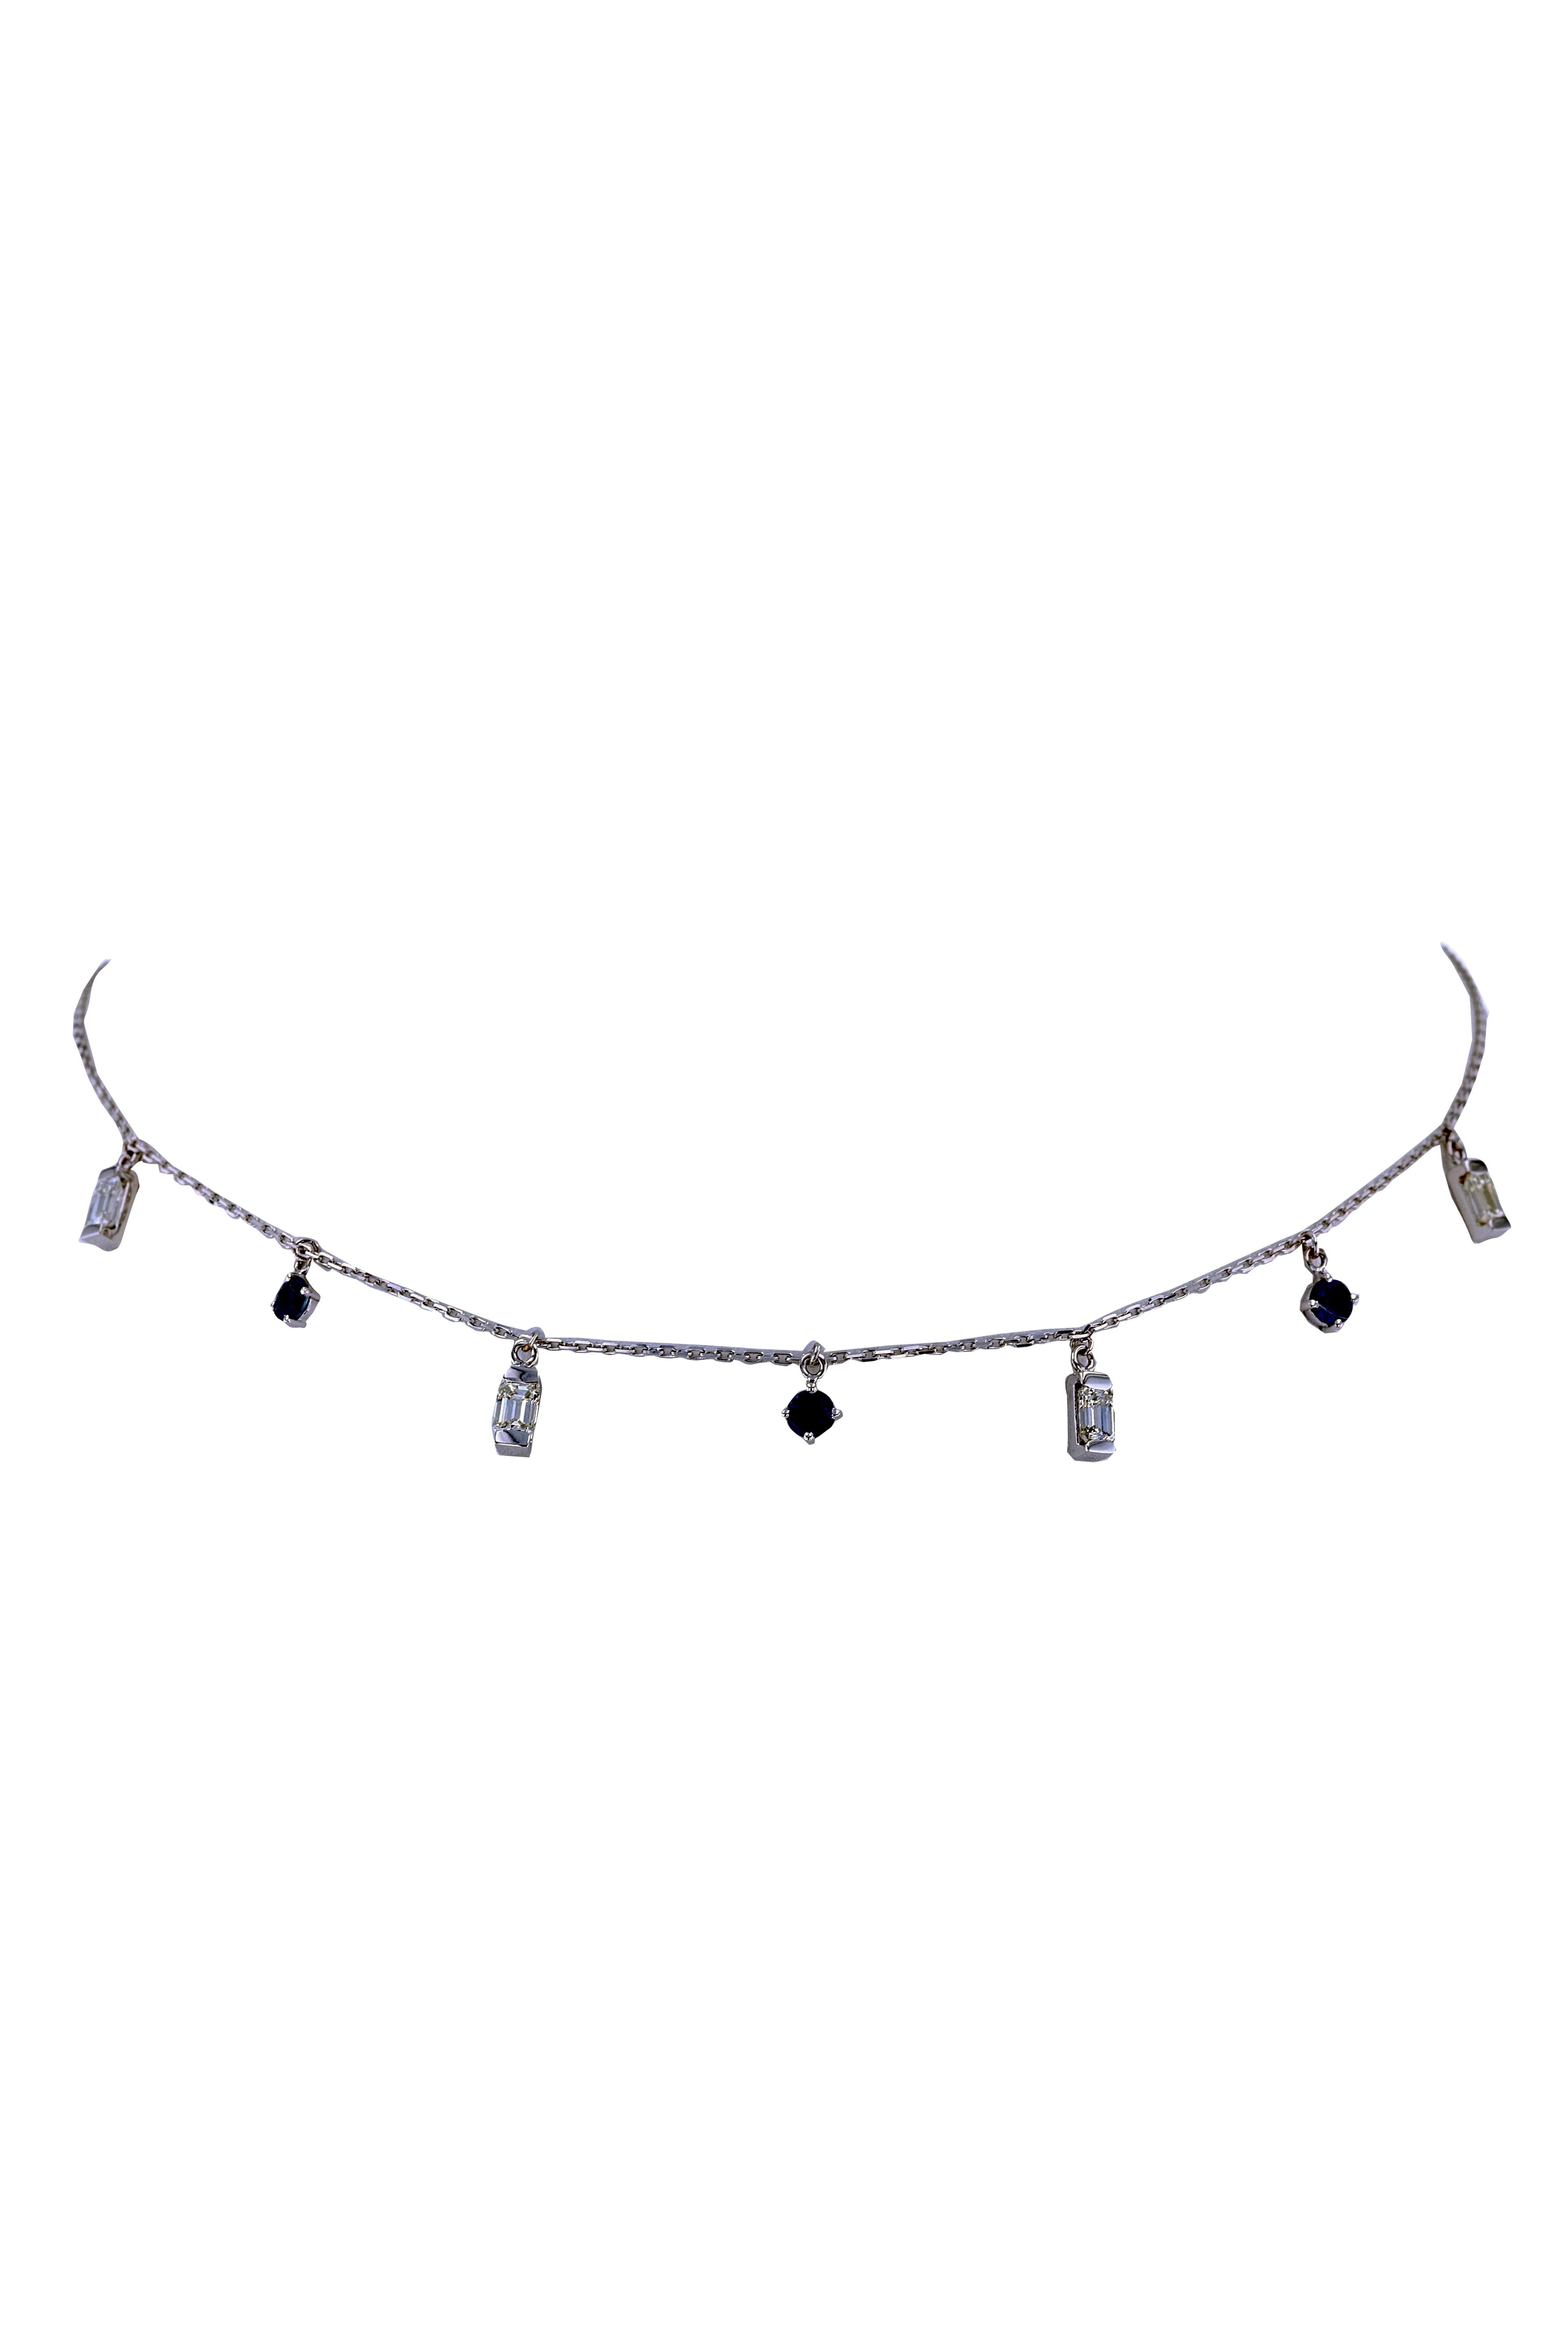 This amazing choker with white emerald cut diamonds each 1/3 carat and blue sapphire is designed to accent the neckline with feminine and delicate touch. It is a perfect choice for any ensemble from business casual to everyday wear.
Diamond clarity: